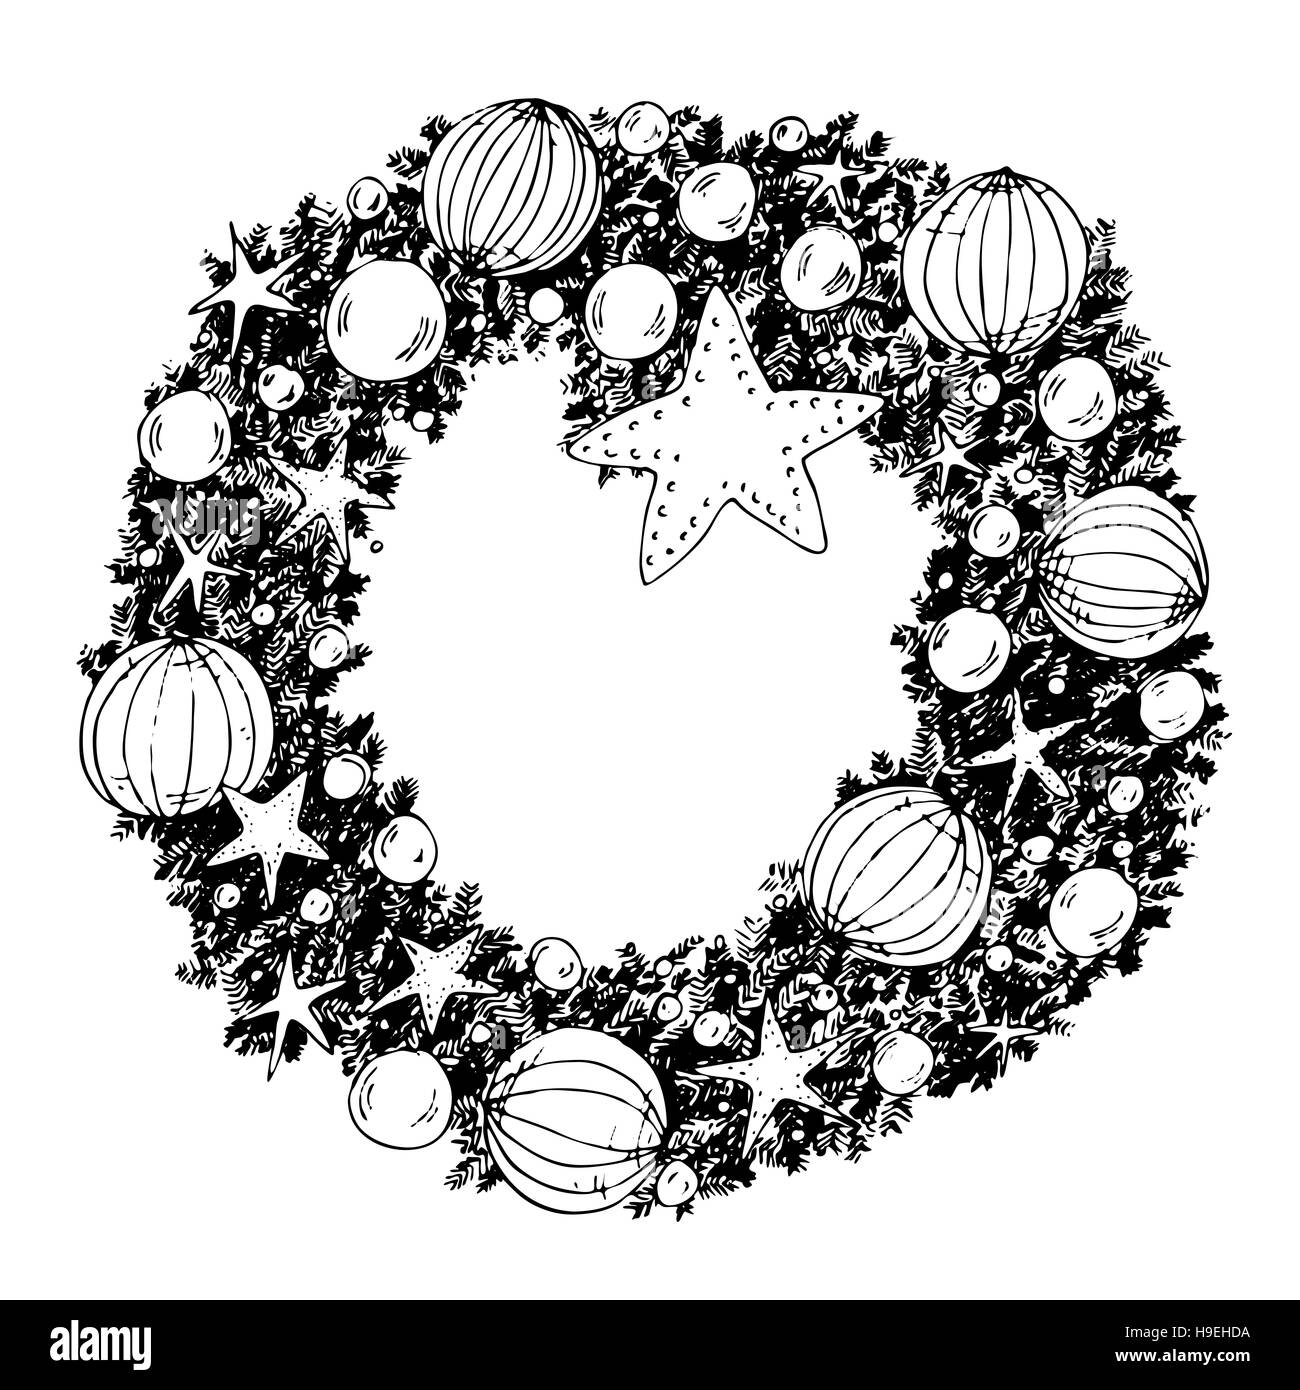 Hand drawn christmas wreath with cones and needles Stock Photo